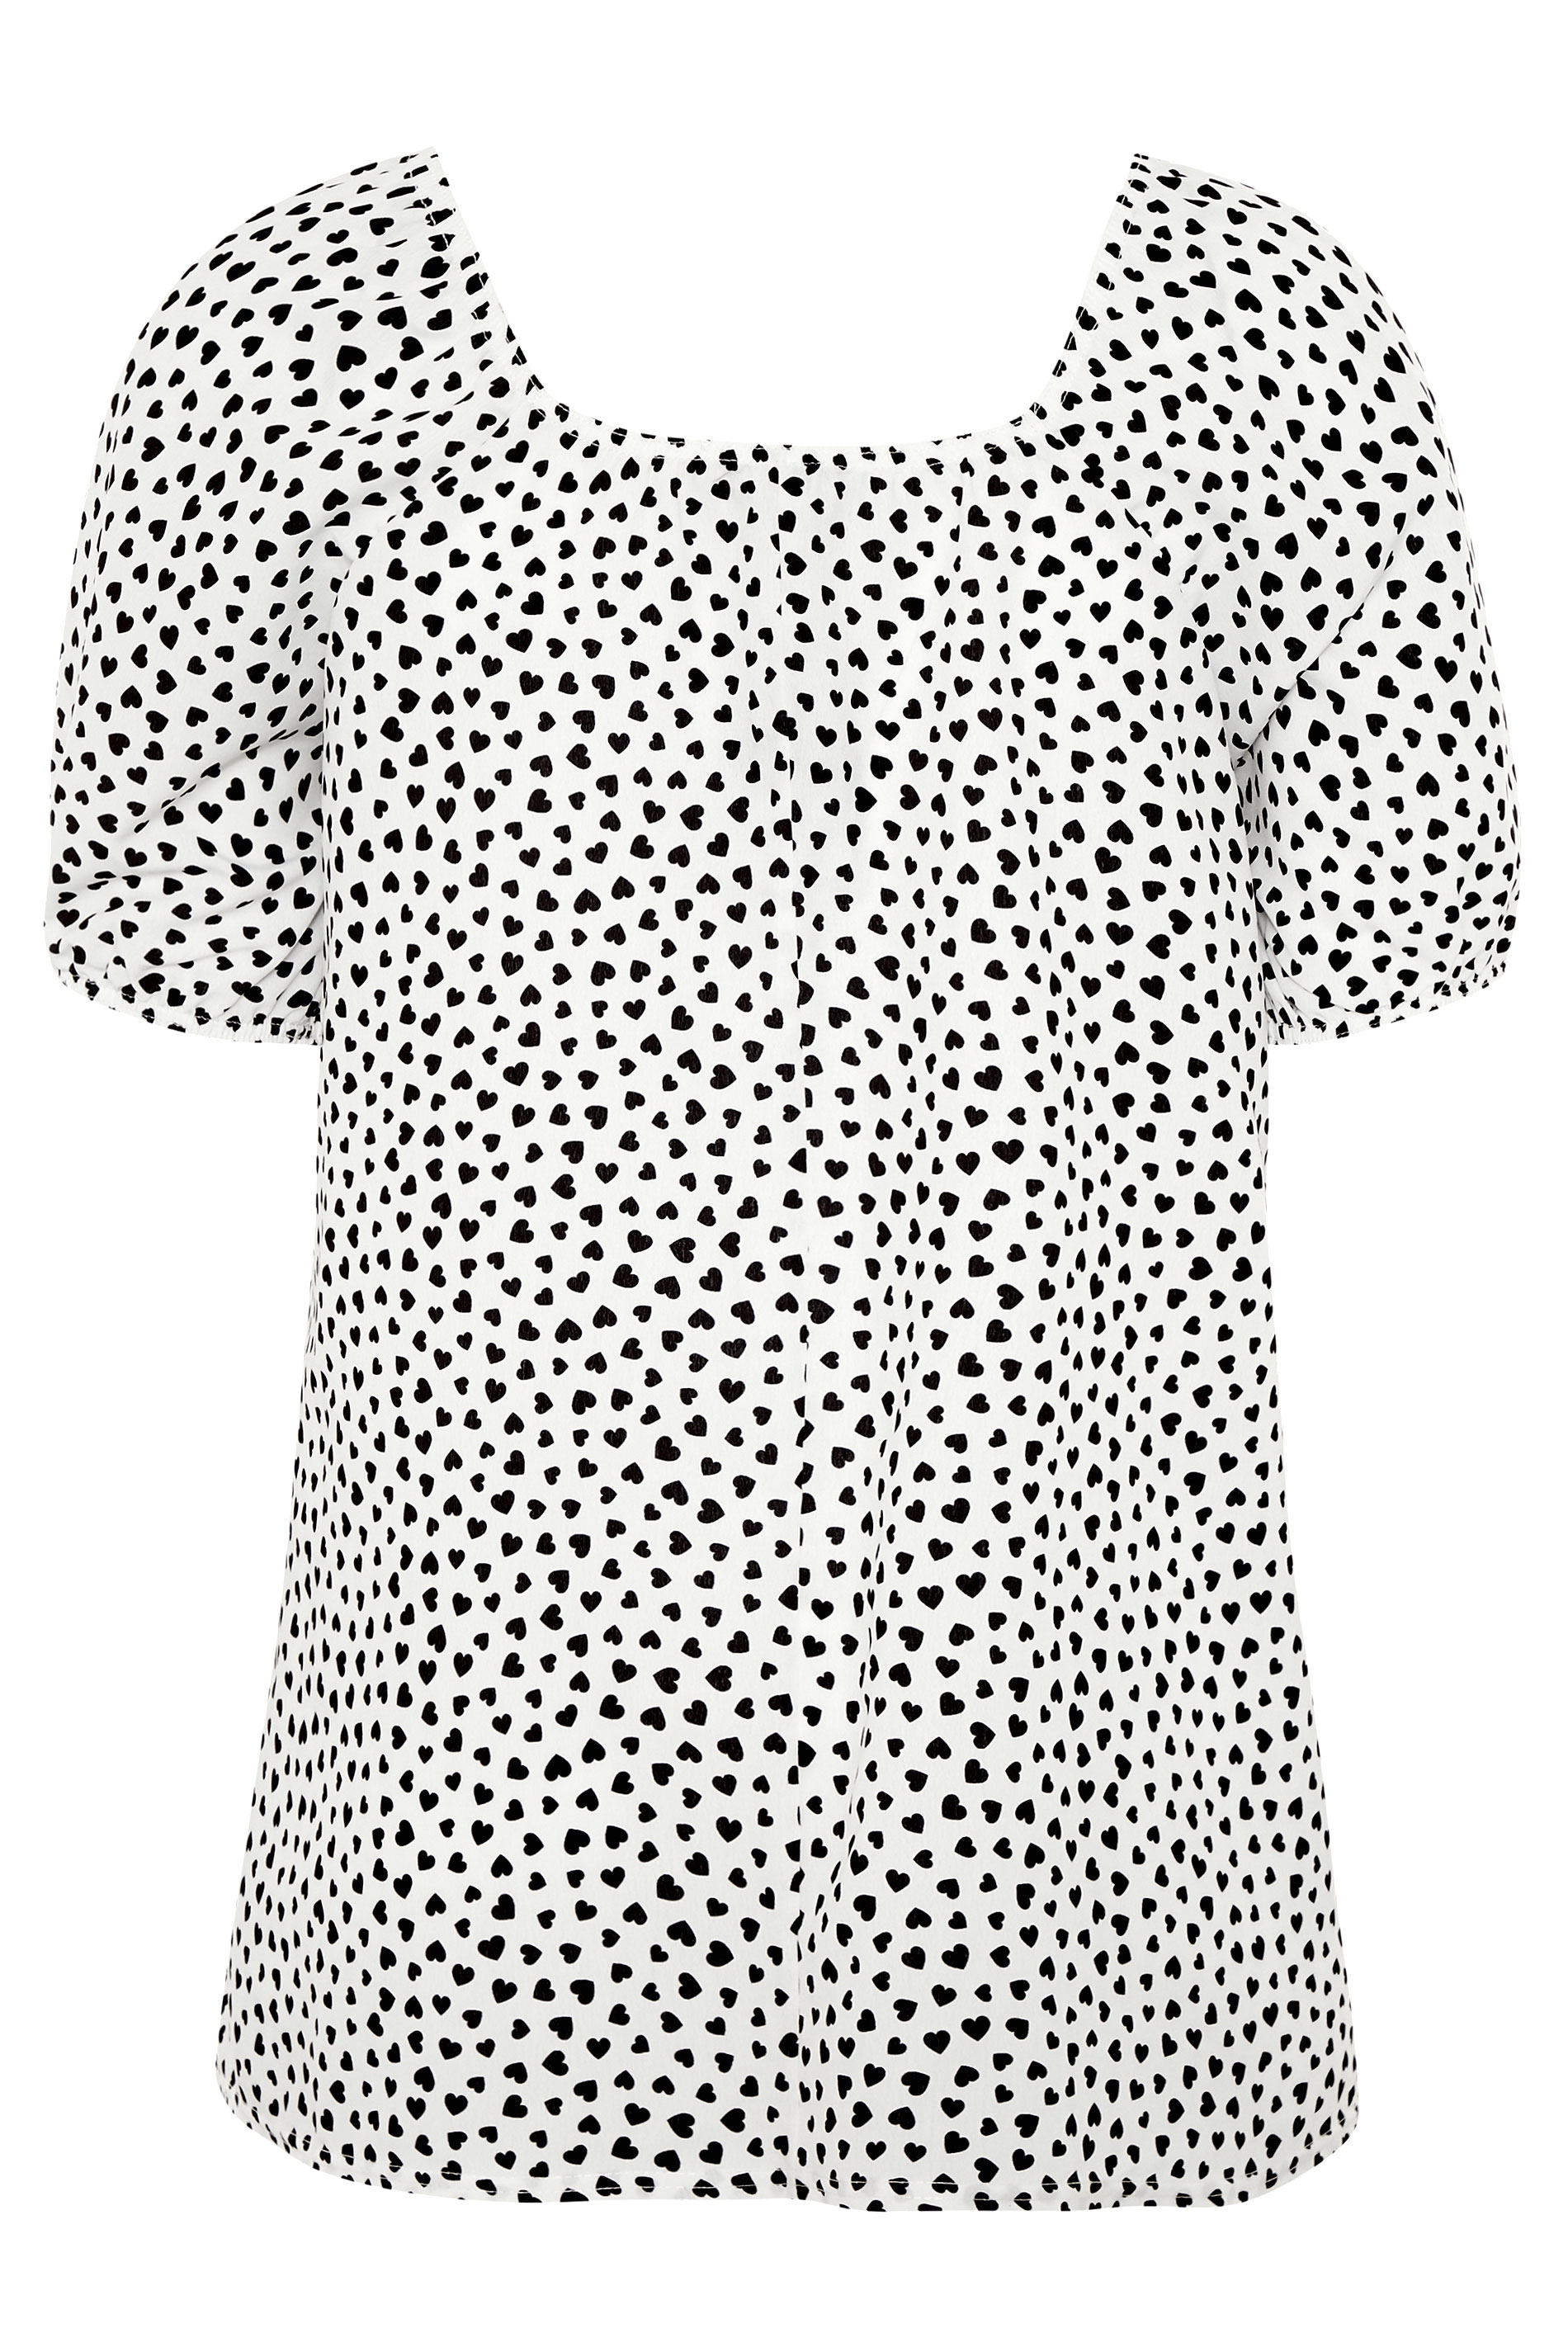 Grande taille  Tops Grande taille  Tops Casual | LIMITED COLLECTION - Top Blanc à Pois Encolure Carrée - DC94861